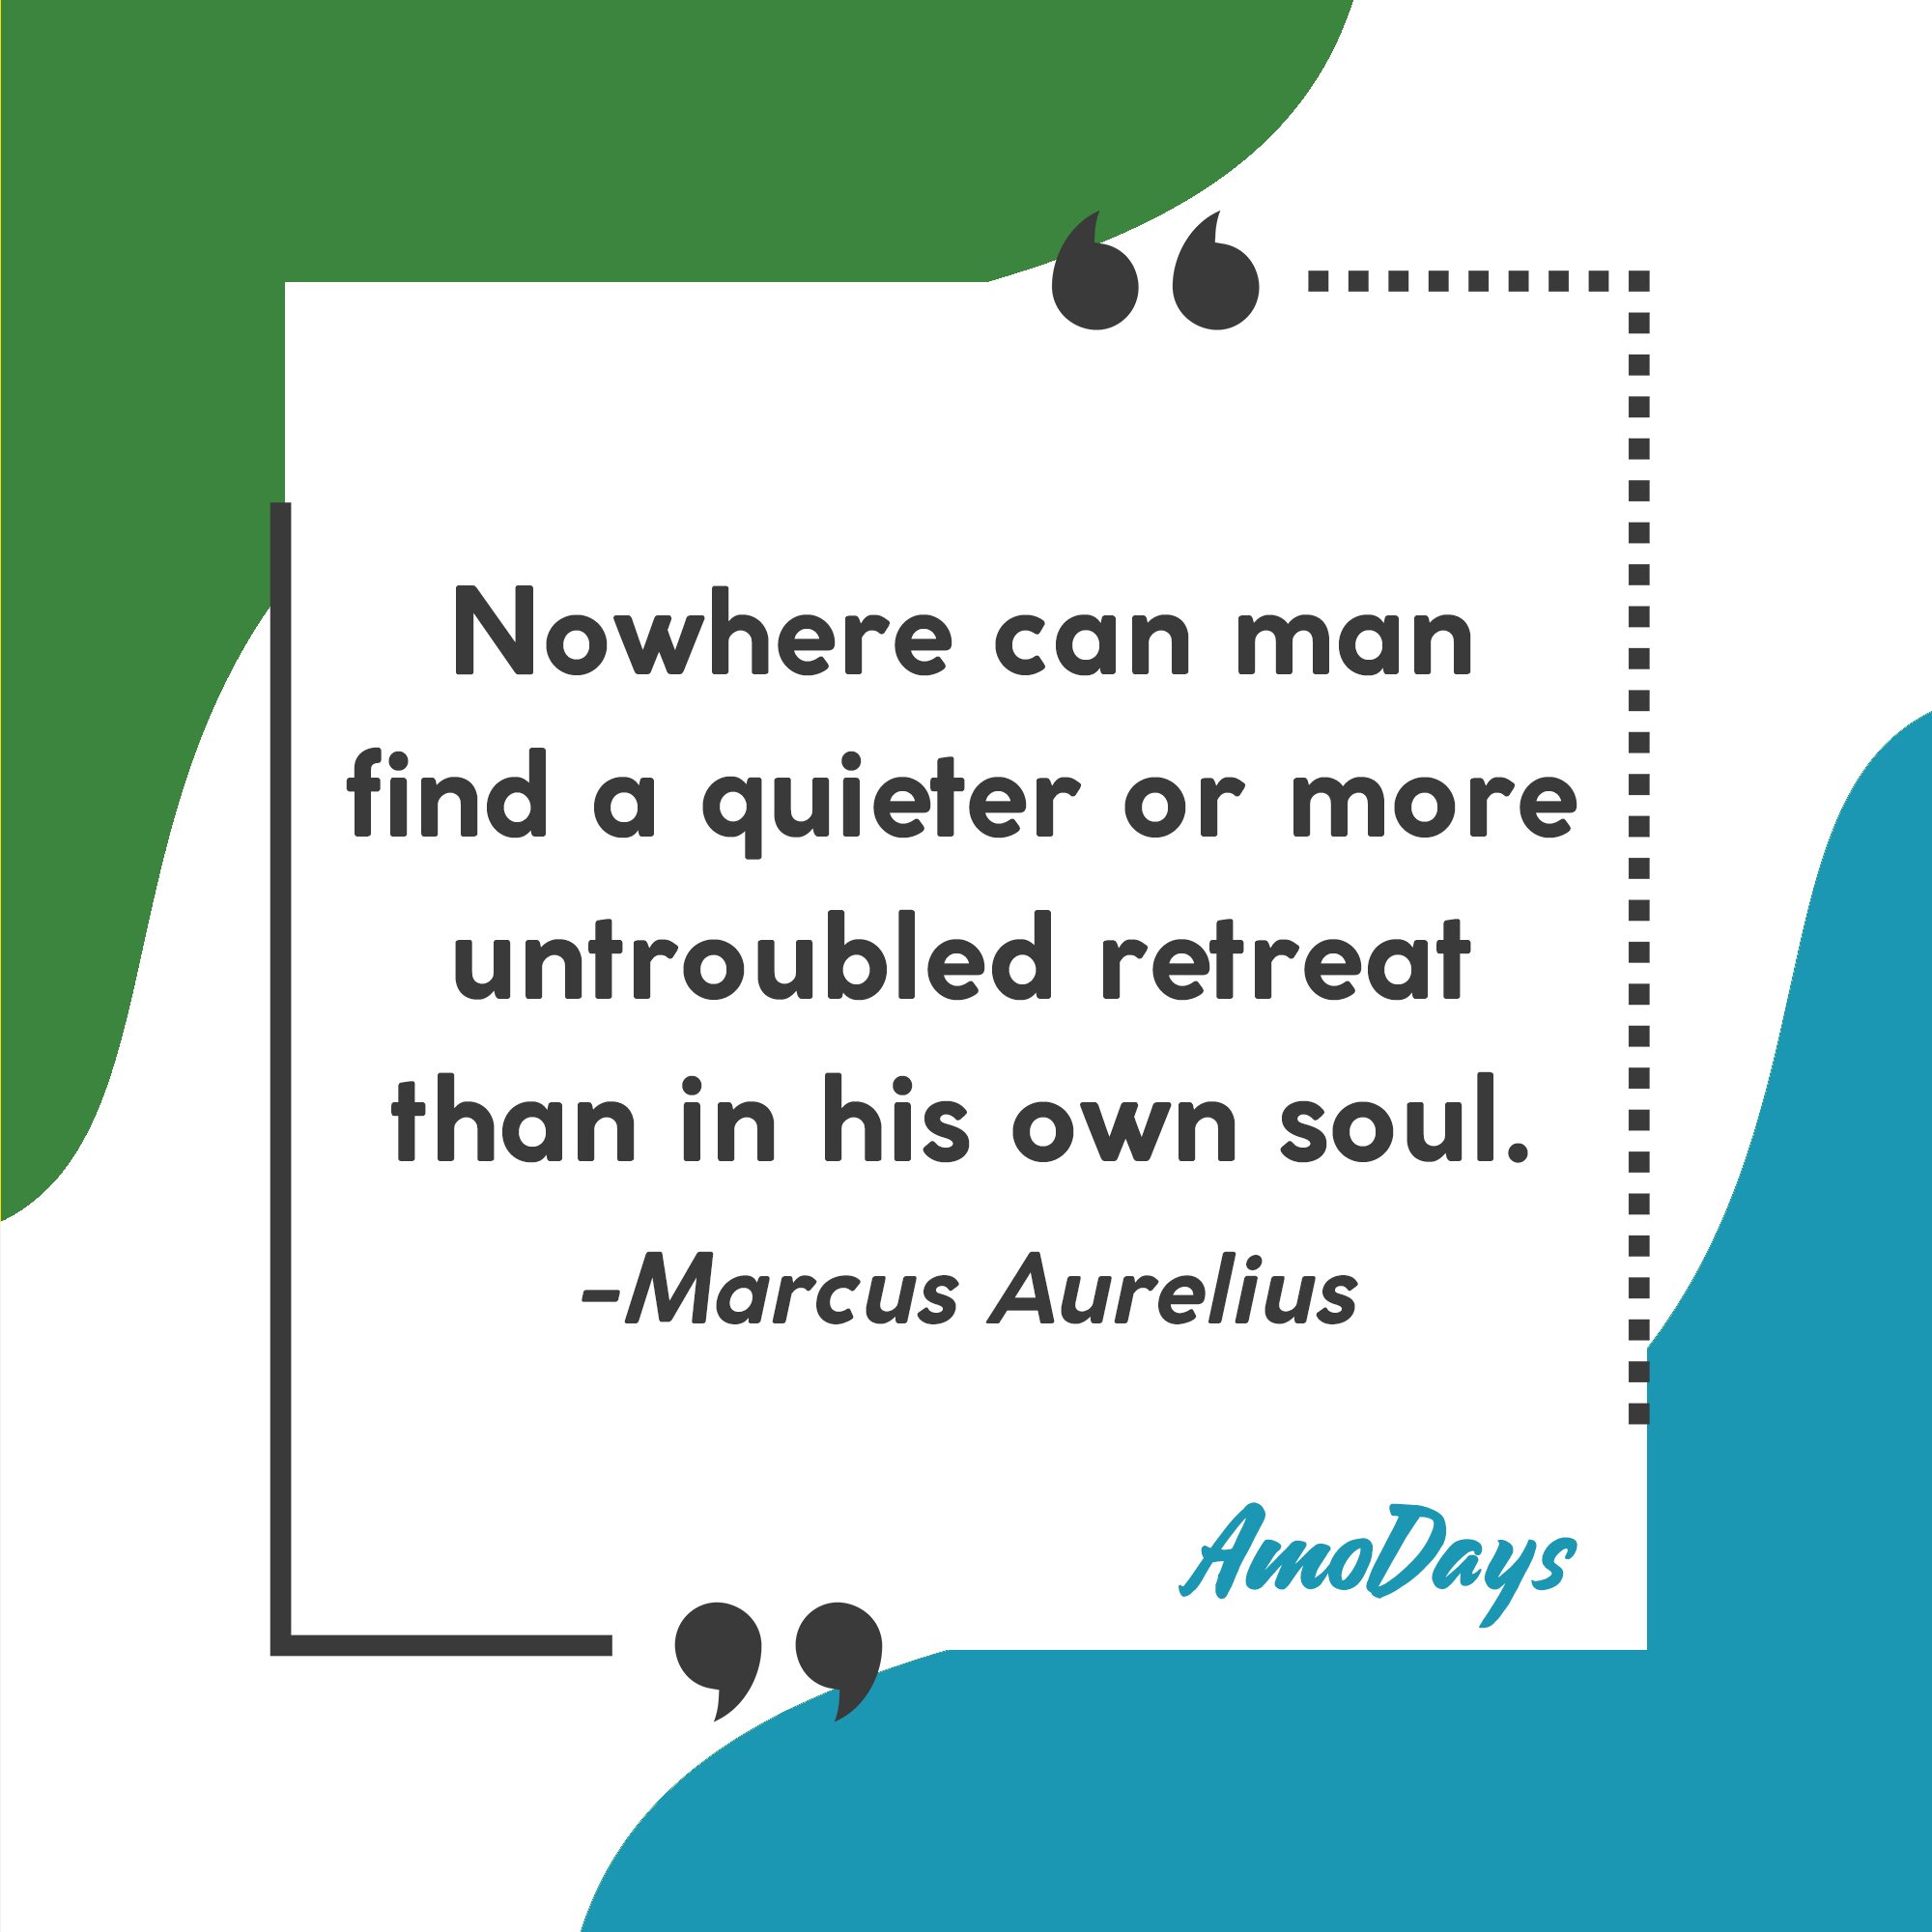 Marcus Aurelius' quote "Nowhere can man find a quieter or more untroubled retreat than in his own soul." | Image: AmoDays